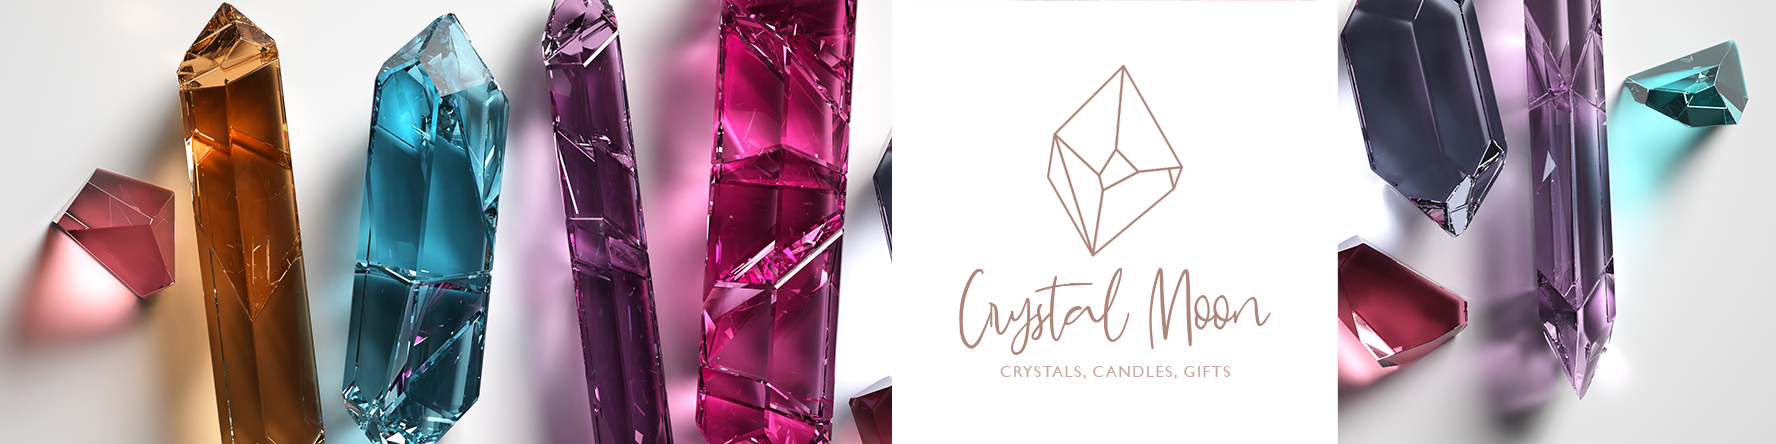 Etsy banner for crystal store